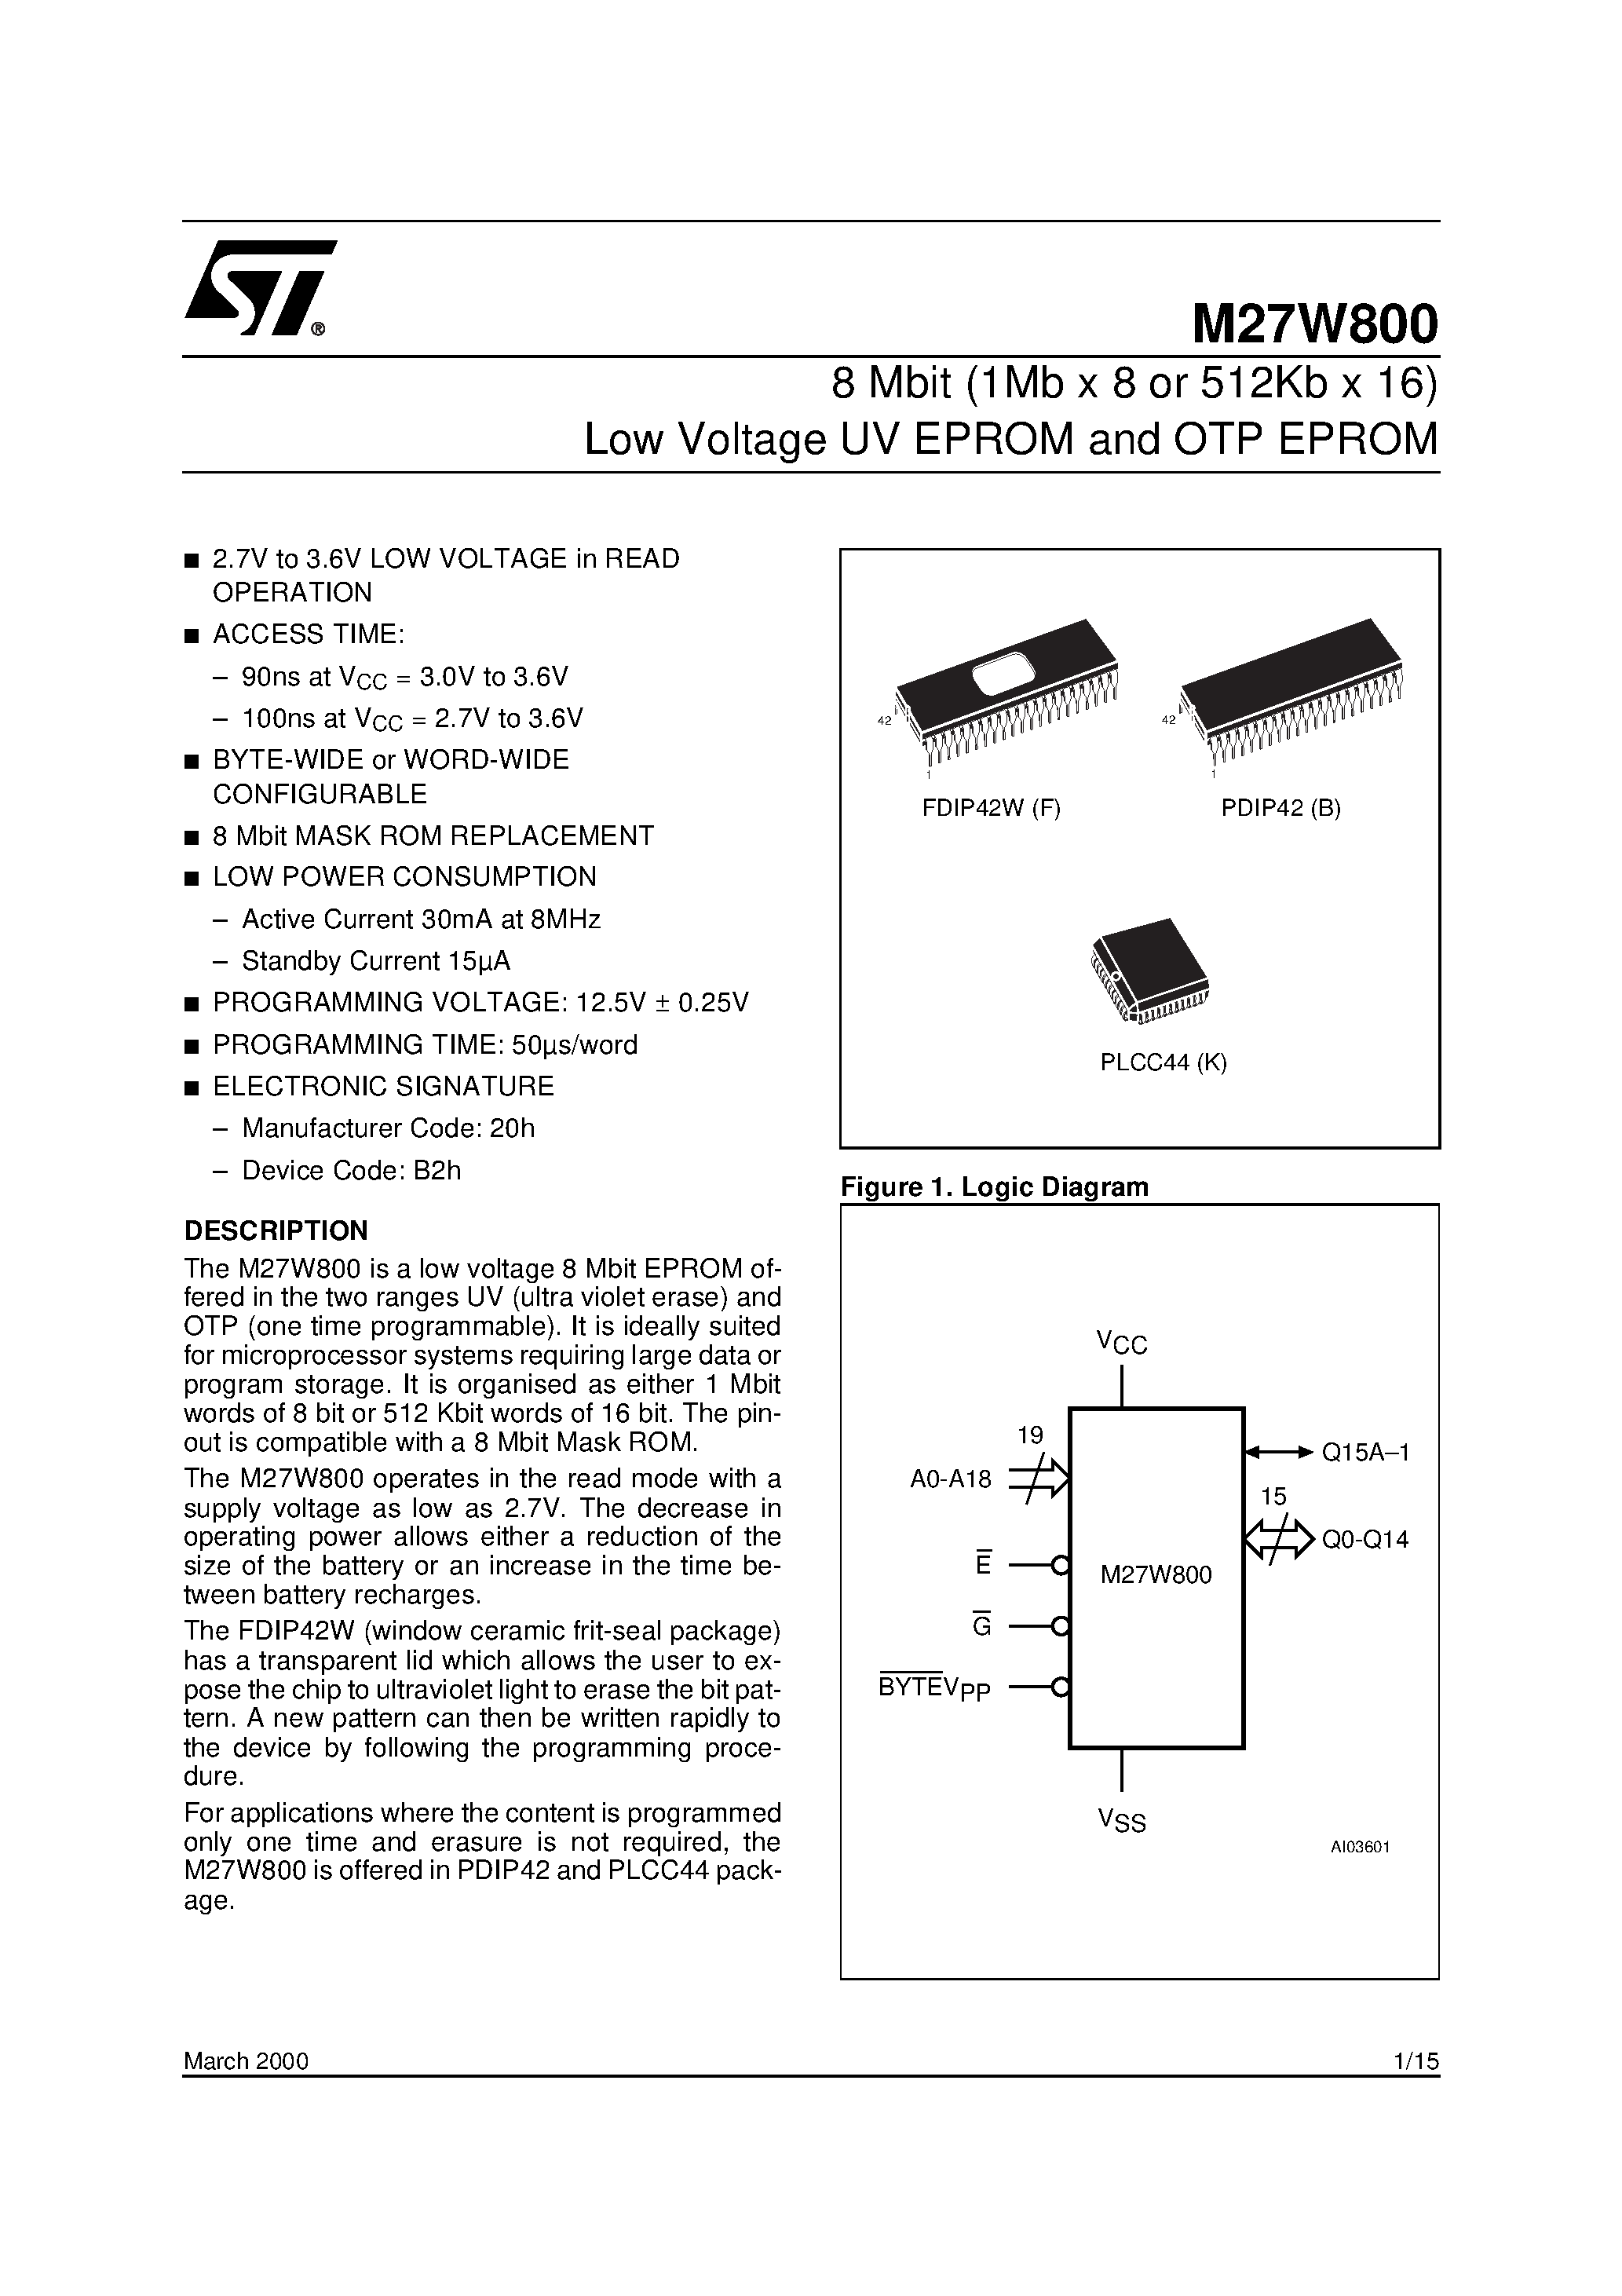 Datasheet M27W800-100K6TR - 8 Mbit 1Mb x 8 or 512Kb x 16 Low Voltage UV EPROM and OTP EPROM page 1